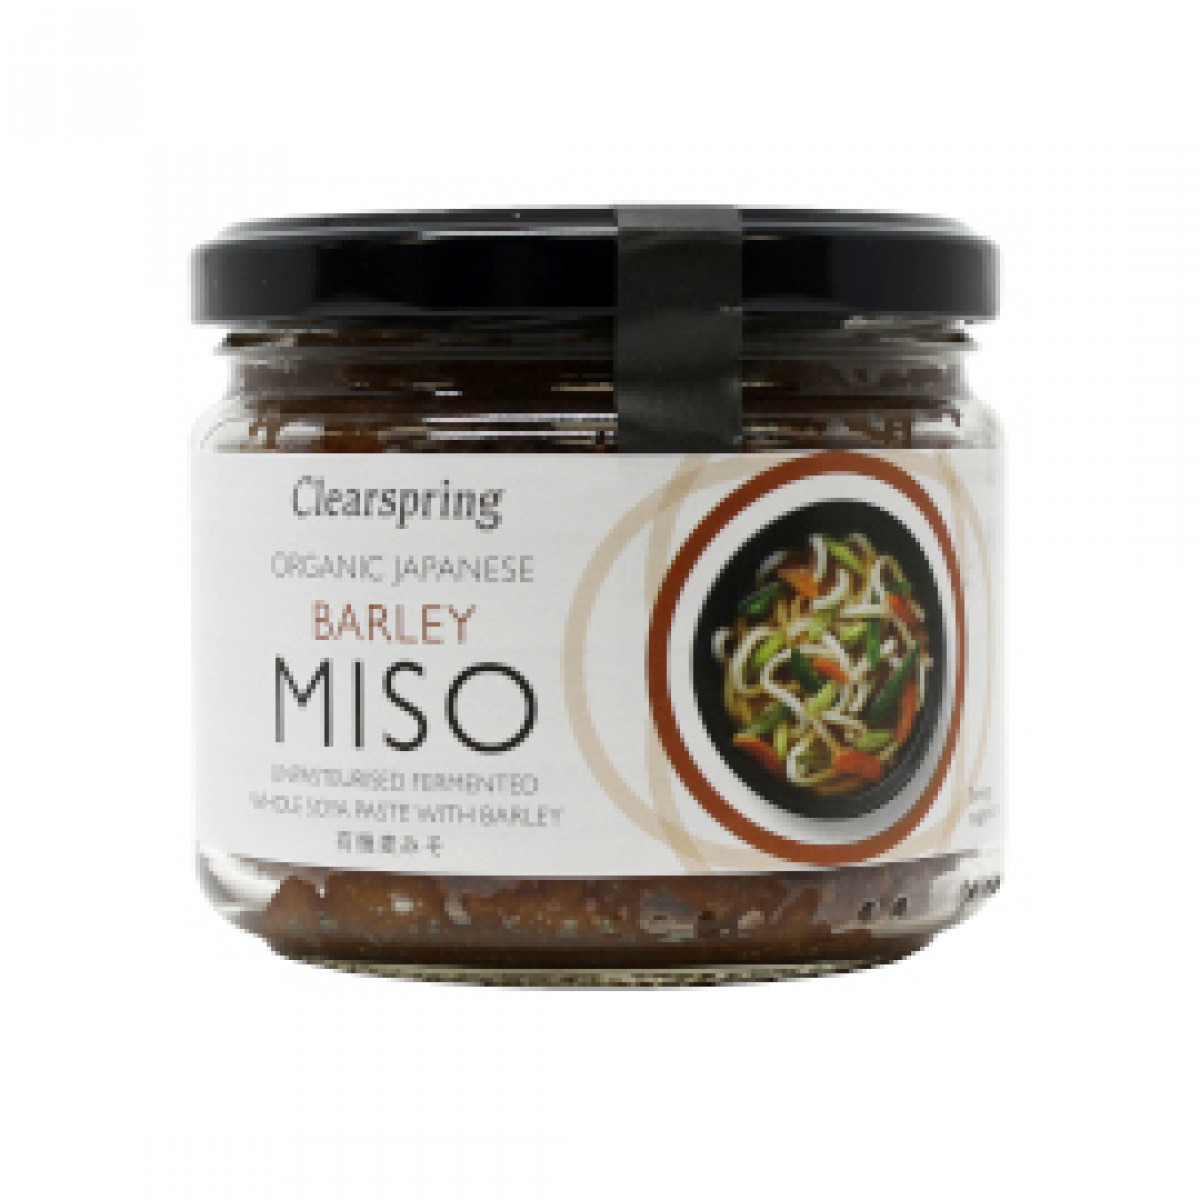 Product picture for Miso - Barley (Unpasteurised)(Jar)